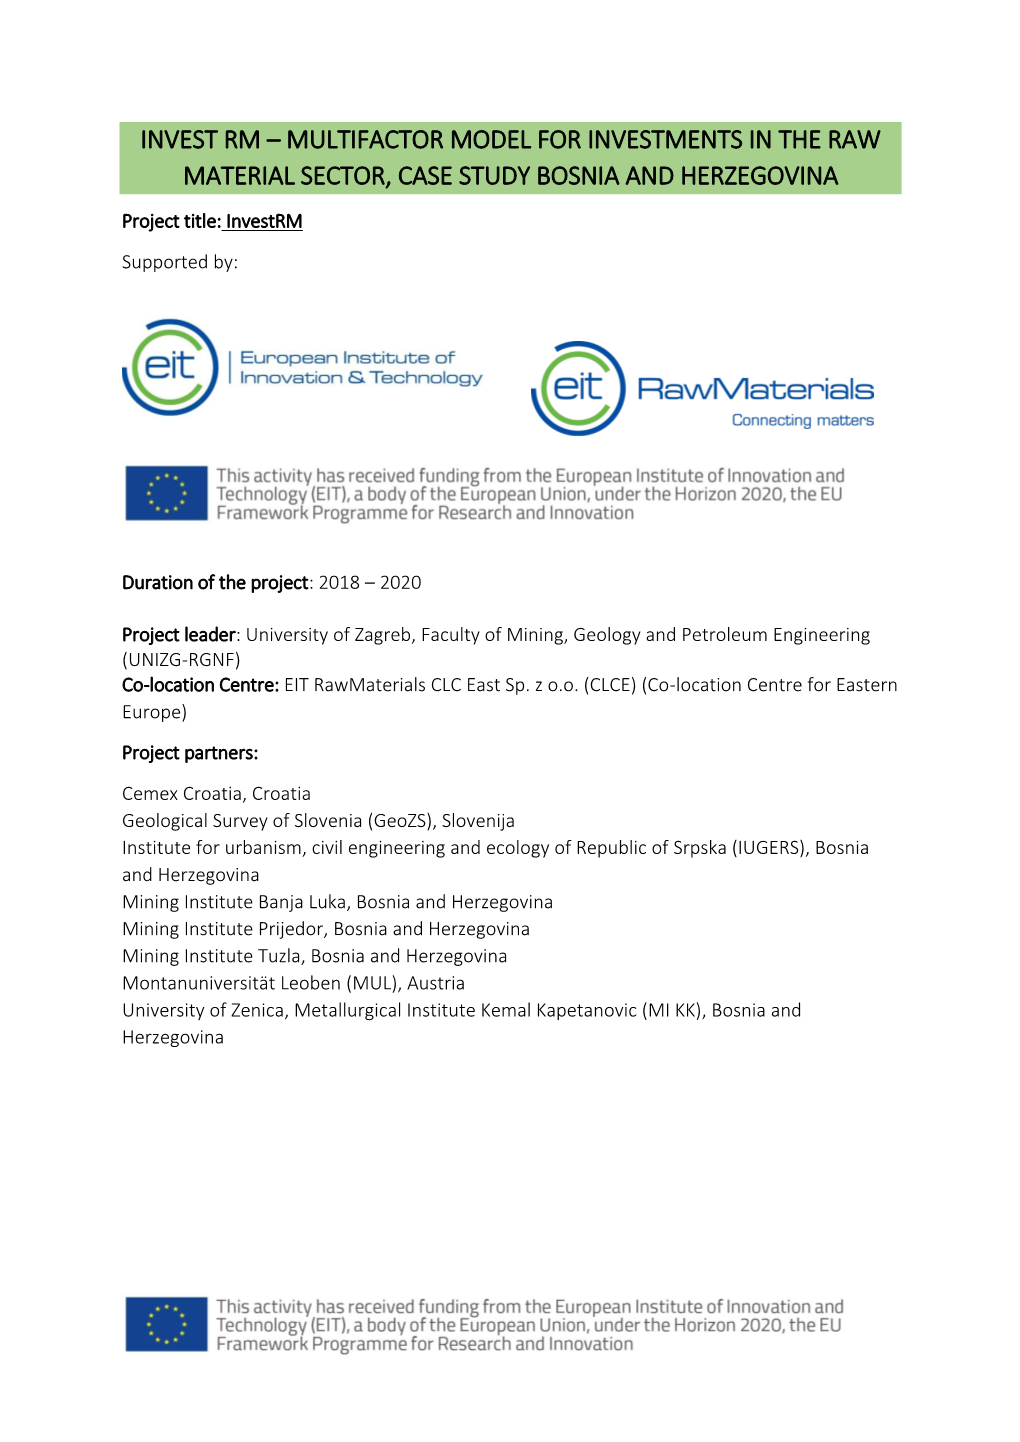 Multifactor Model for Investments in the Raw Material Sector, Case Study Bosnia and Herzegovina